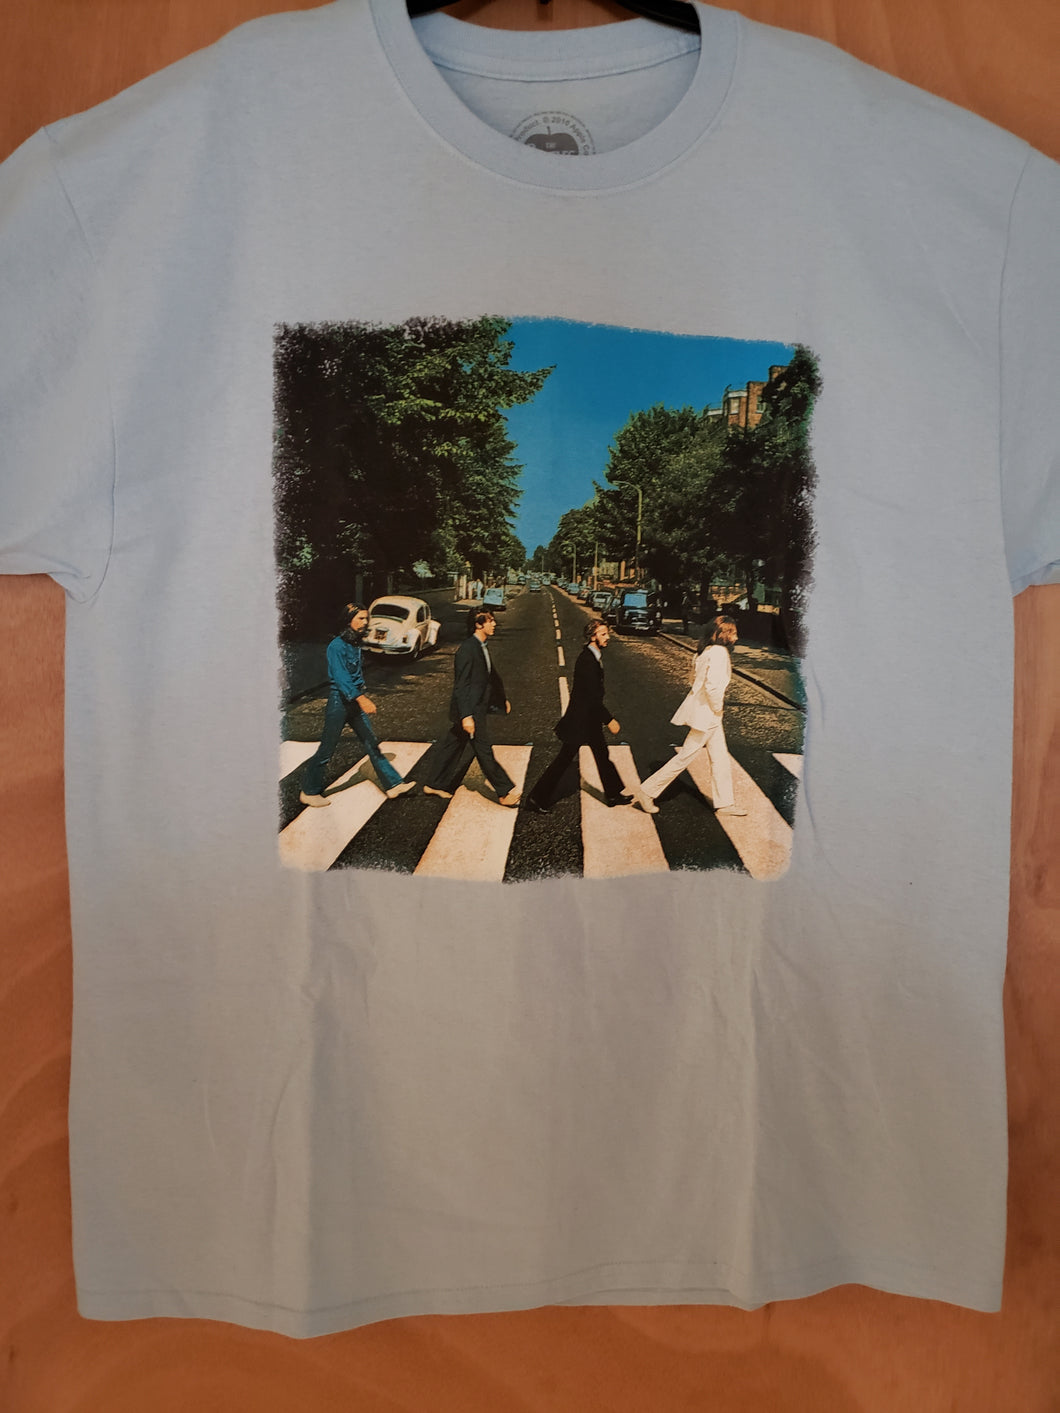 THE BEATLES TSHIRT BRAND NEW EXTRA LARGE